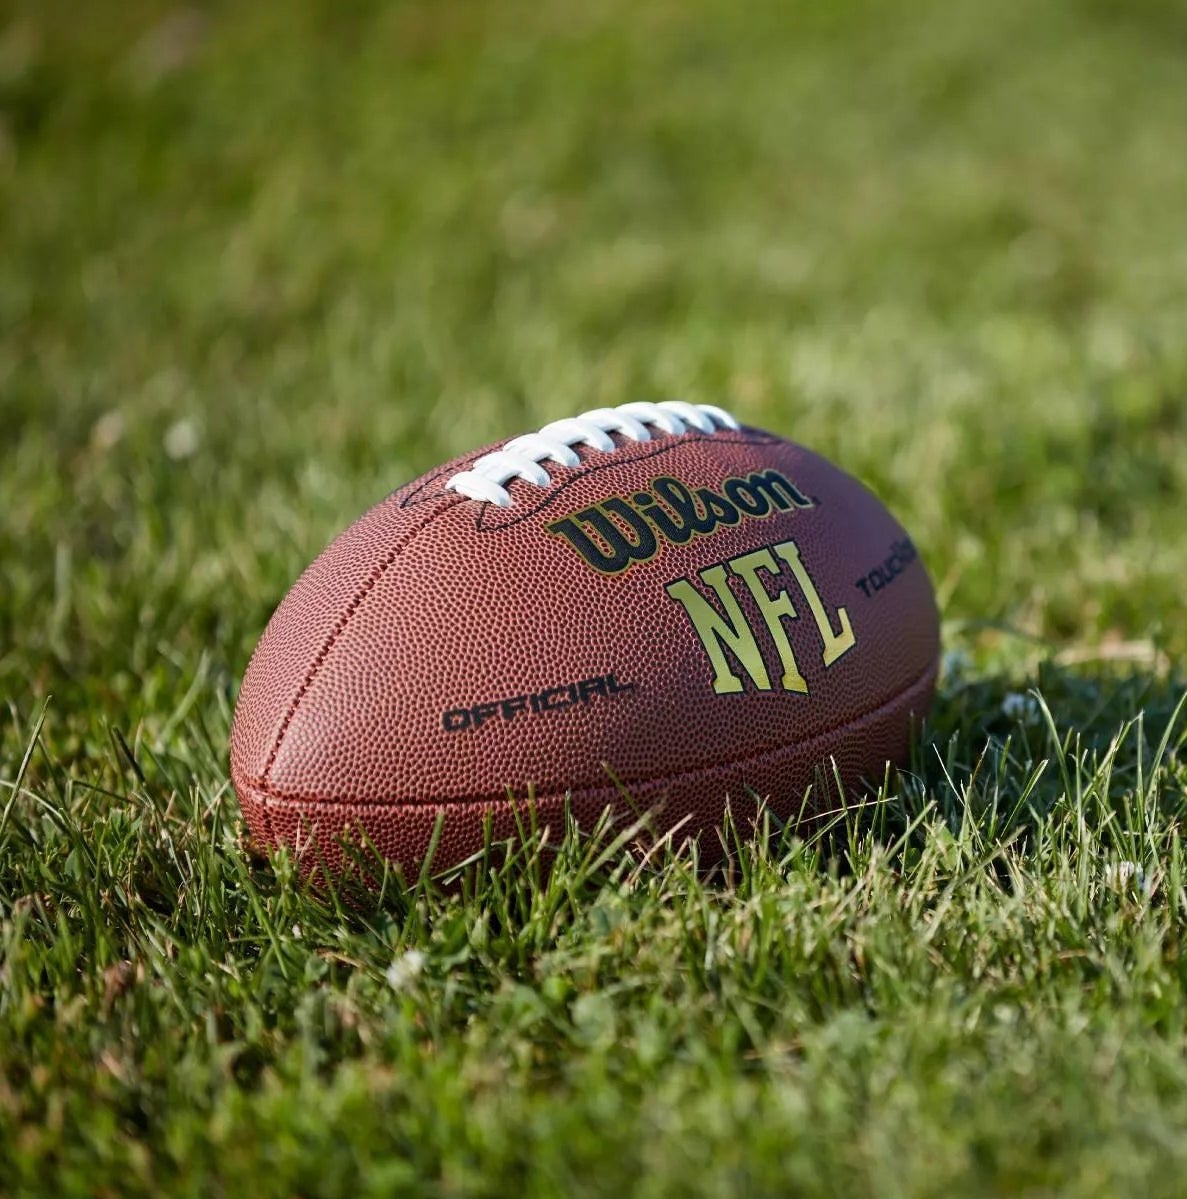 The Wilson Touchdown official football of the NFL